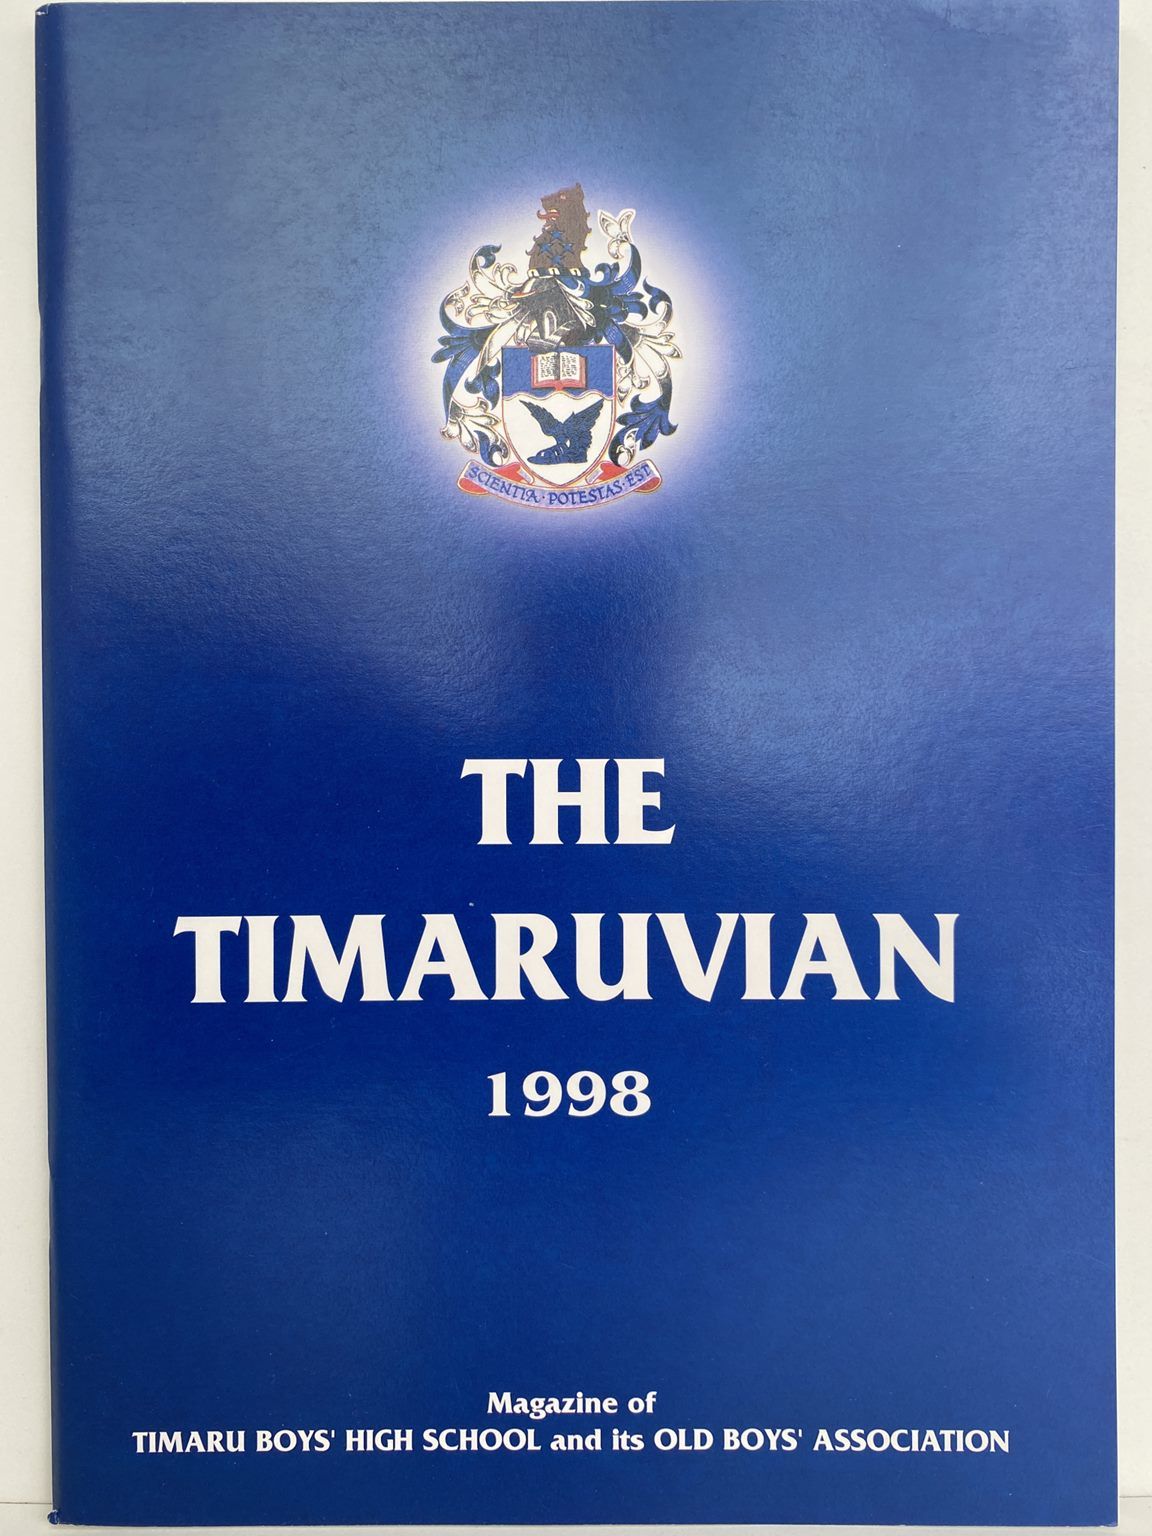 THE TIMARUVIAN: Magazine of the Timaru Boys' High School and its Old Boys' Association 1998